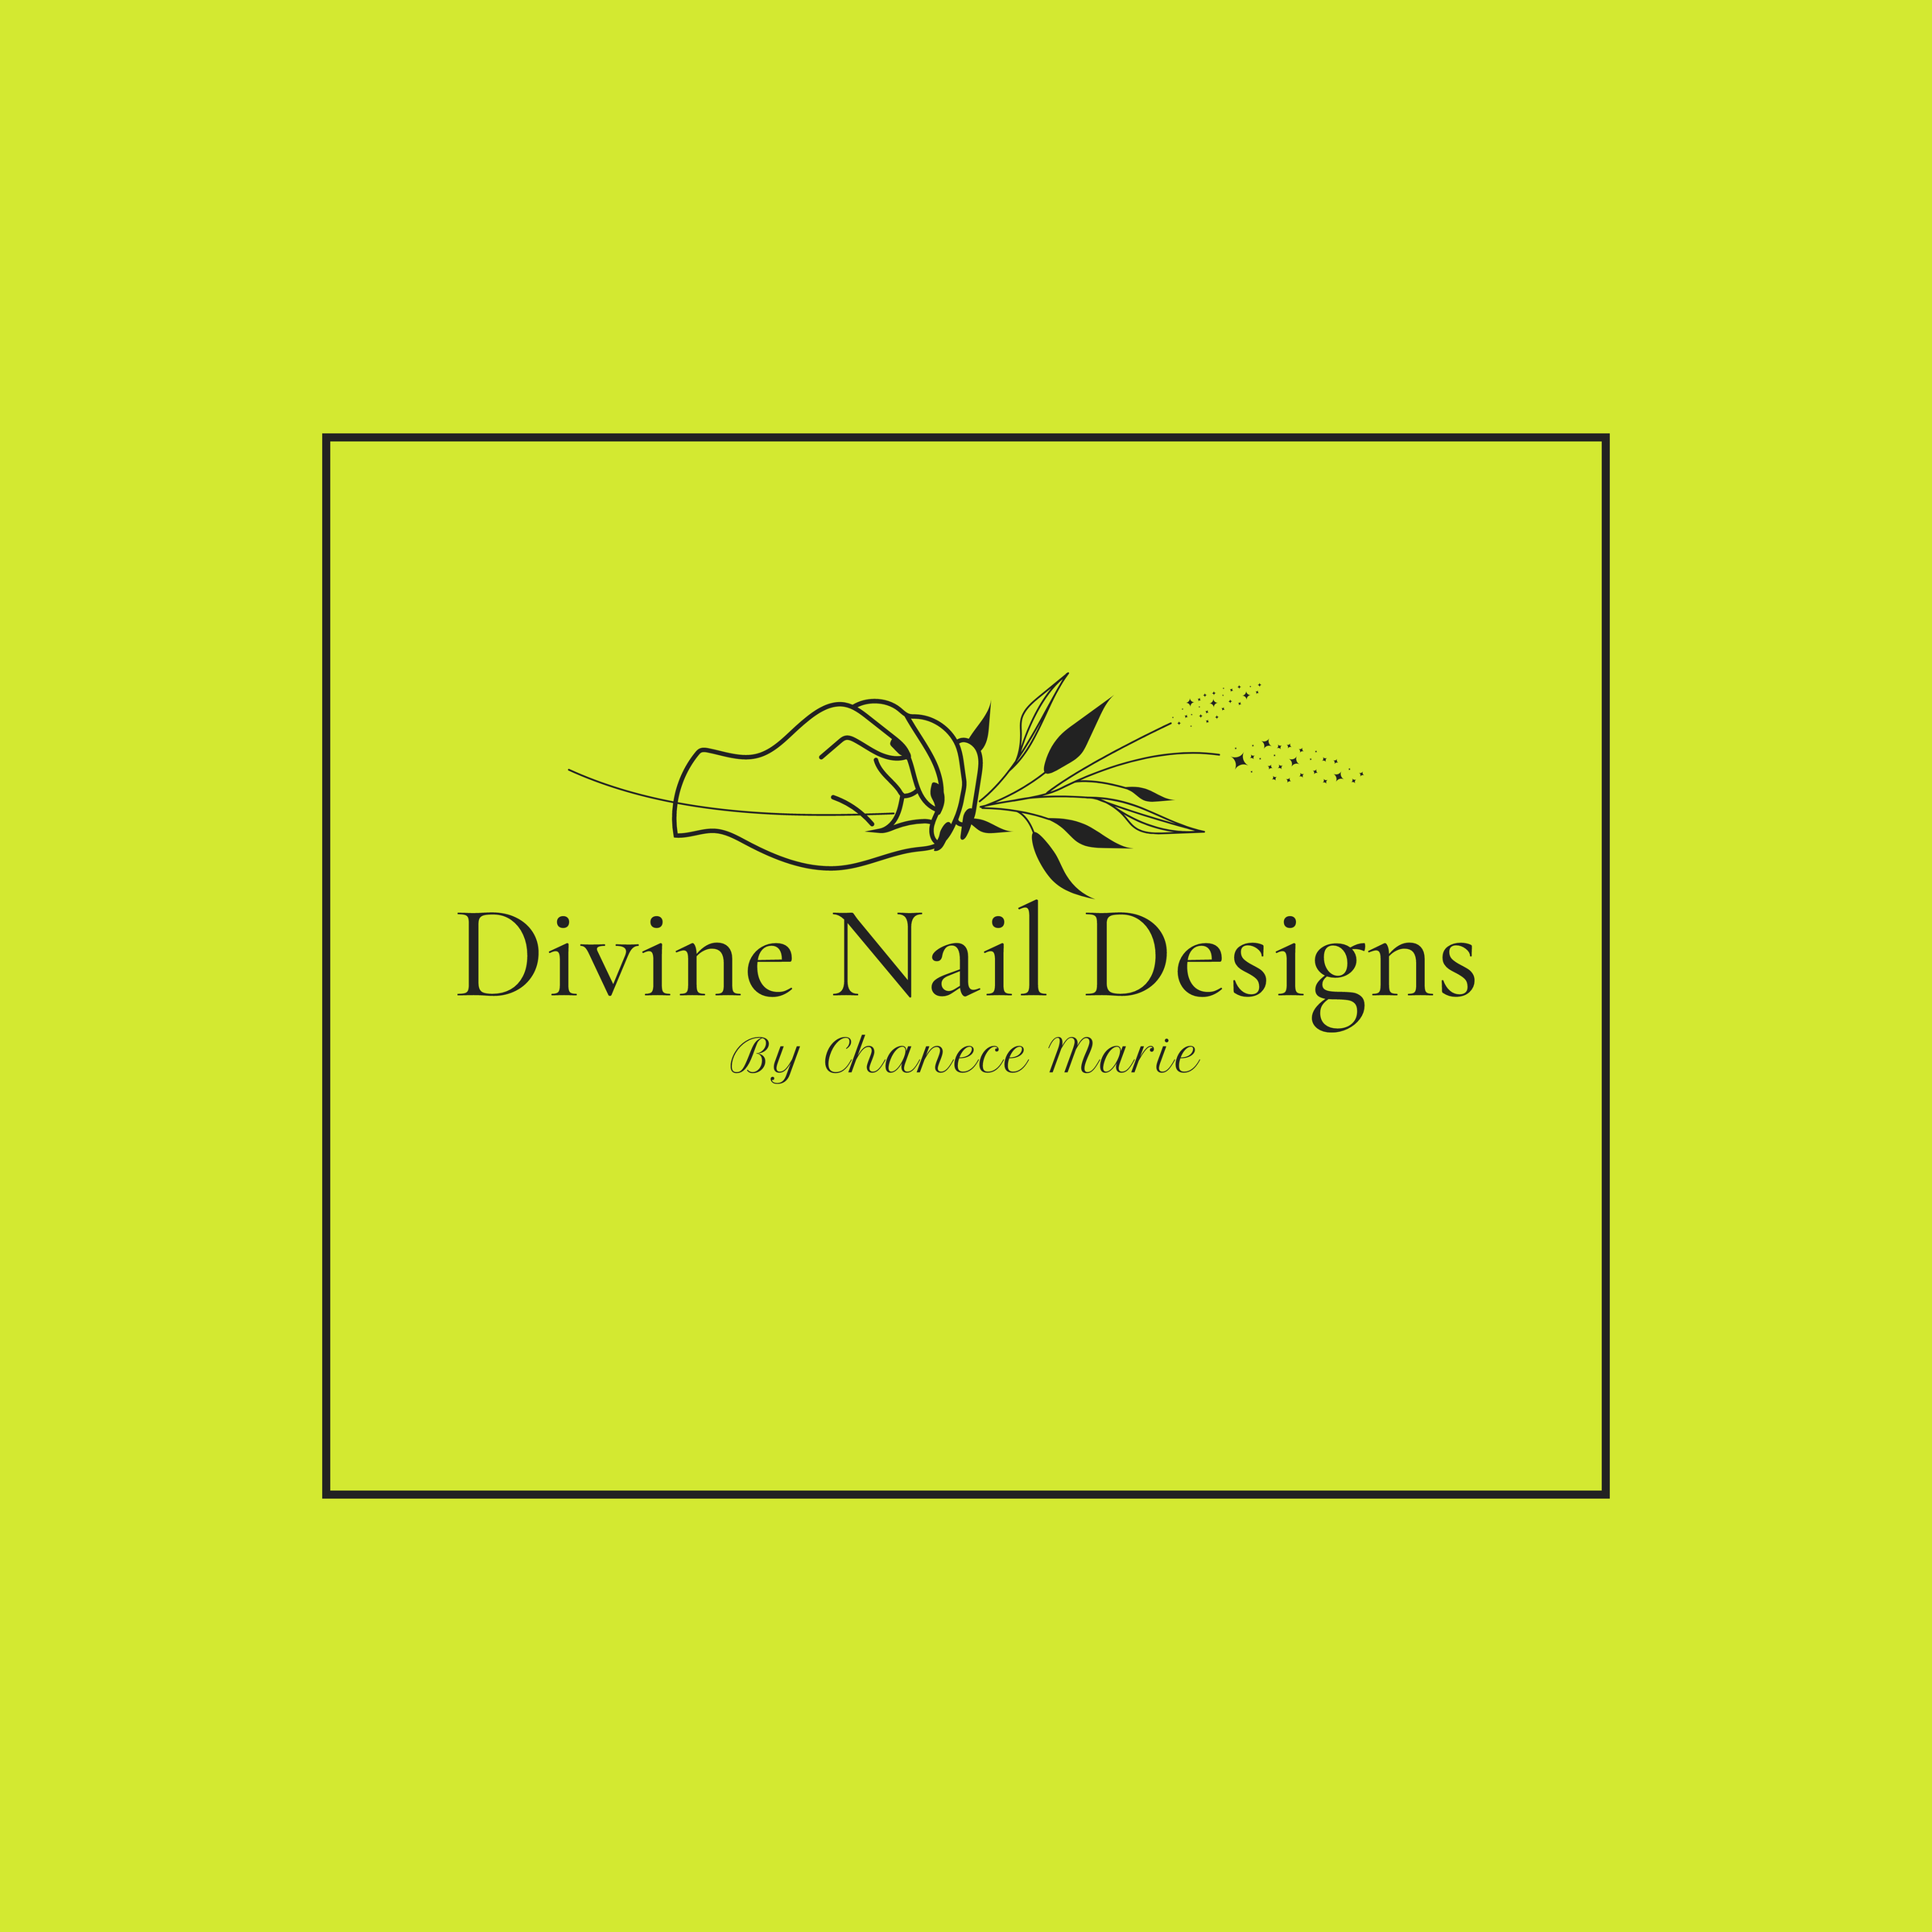 Divine Nails And Beauty Studio - Designer inspired nail art now available  in our salon 👌✨ Make you look rich from fingers to toes 😎😆  @notpolish_nail @youngnailsinc #lvnails #nailswithfoil #acrylicnails  #coffinshape